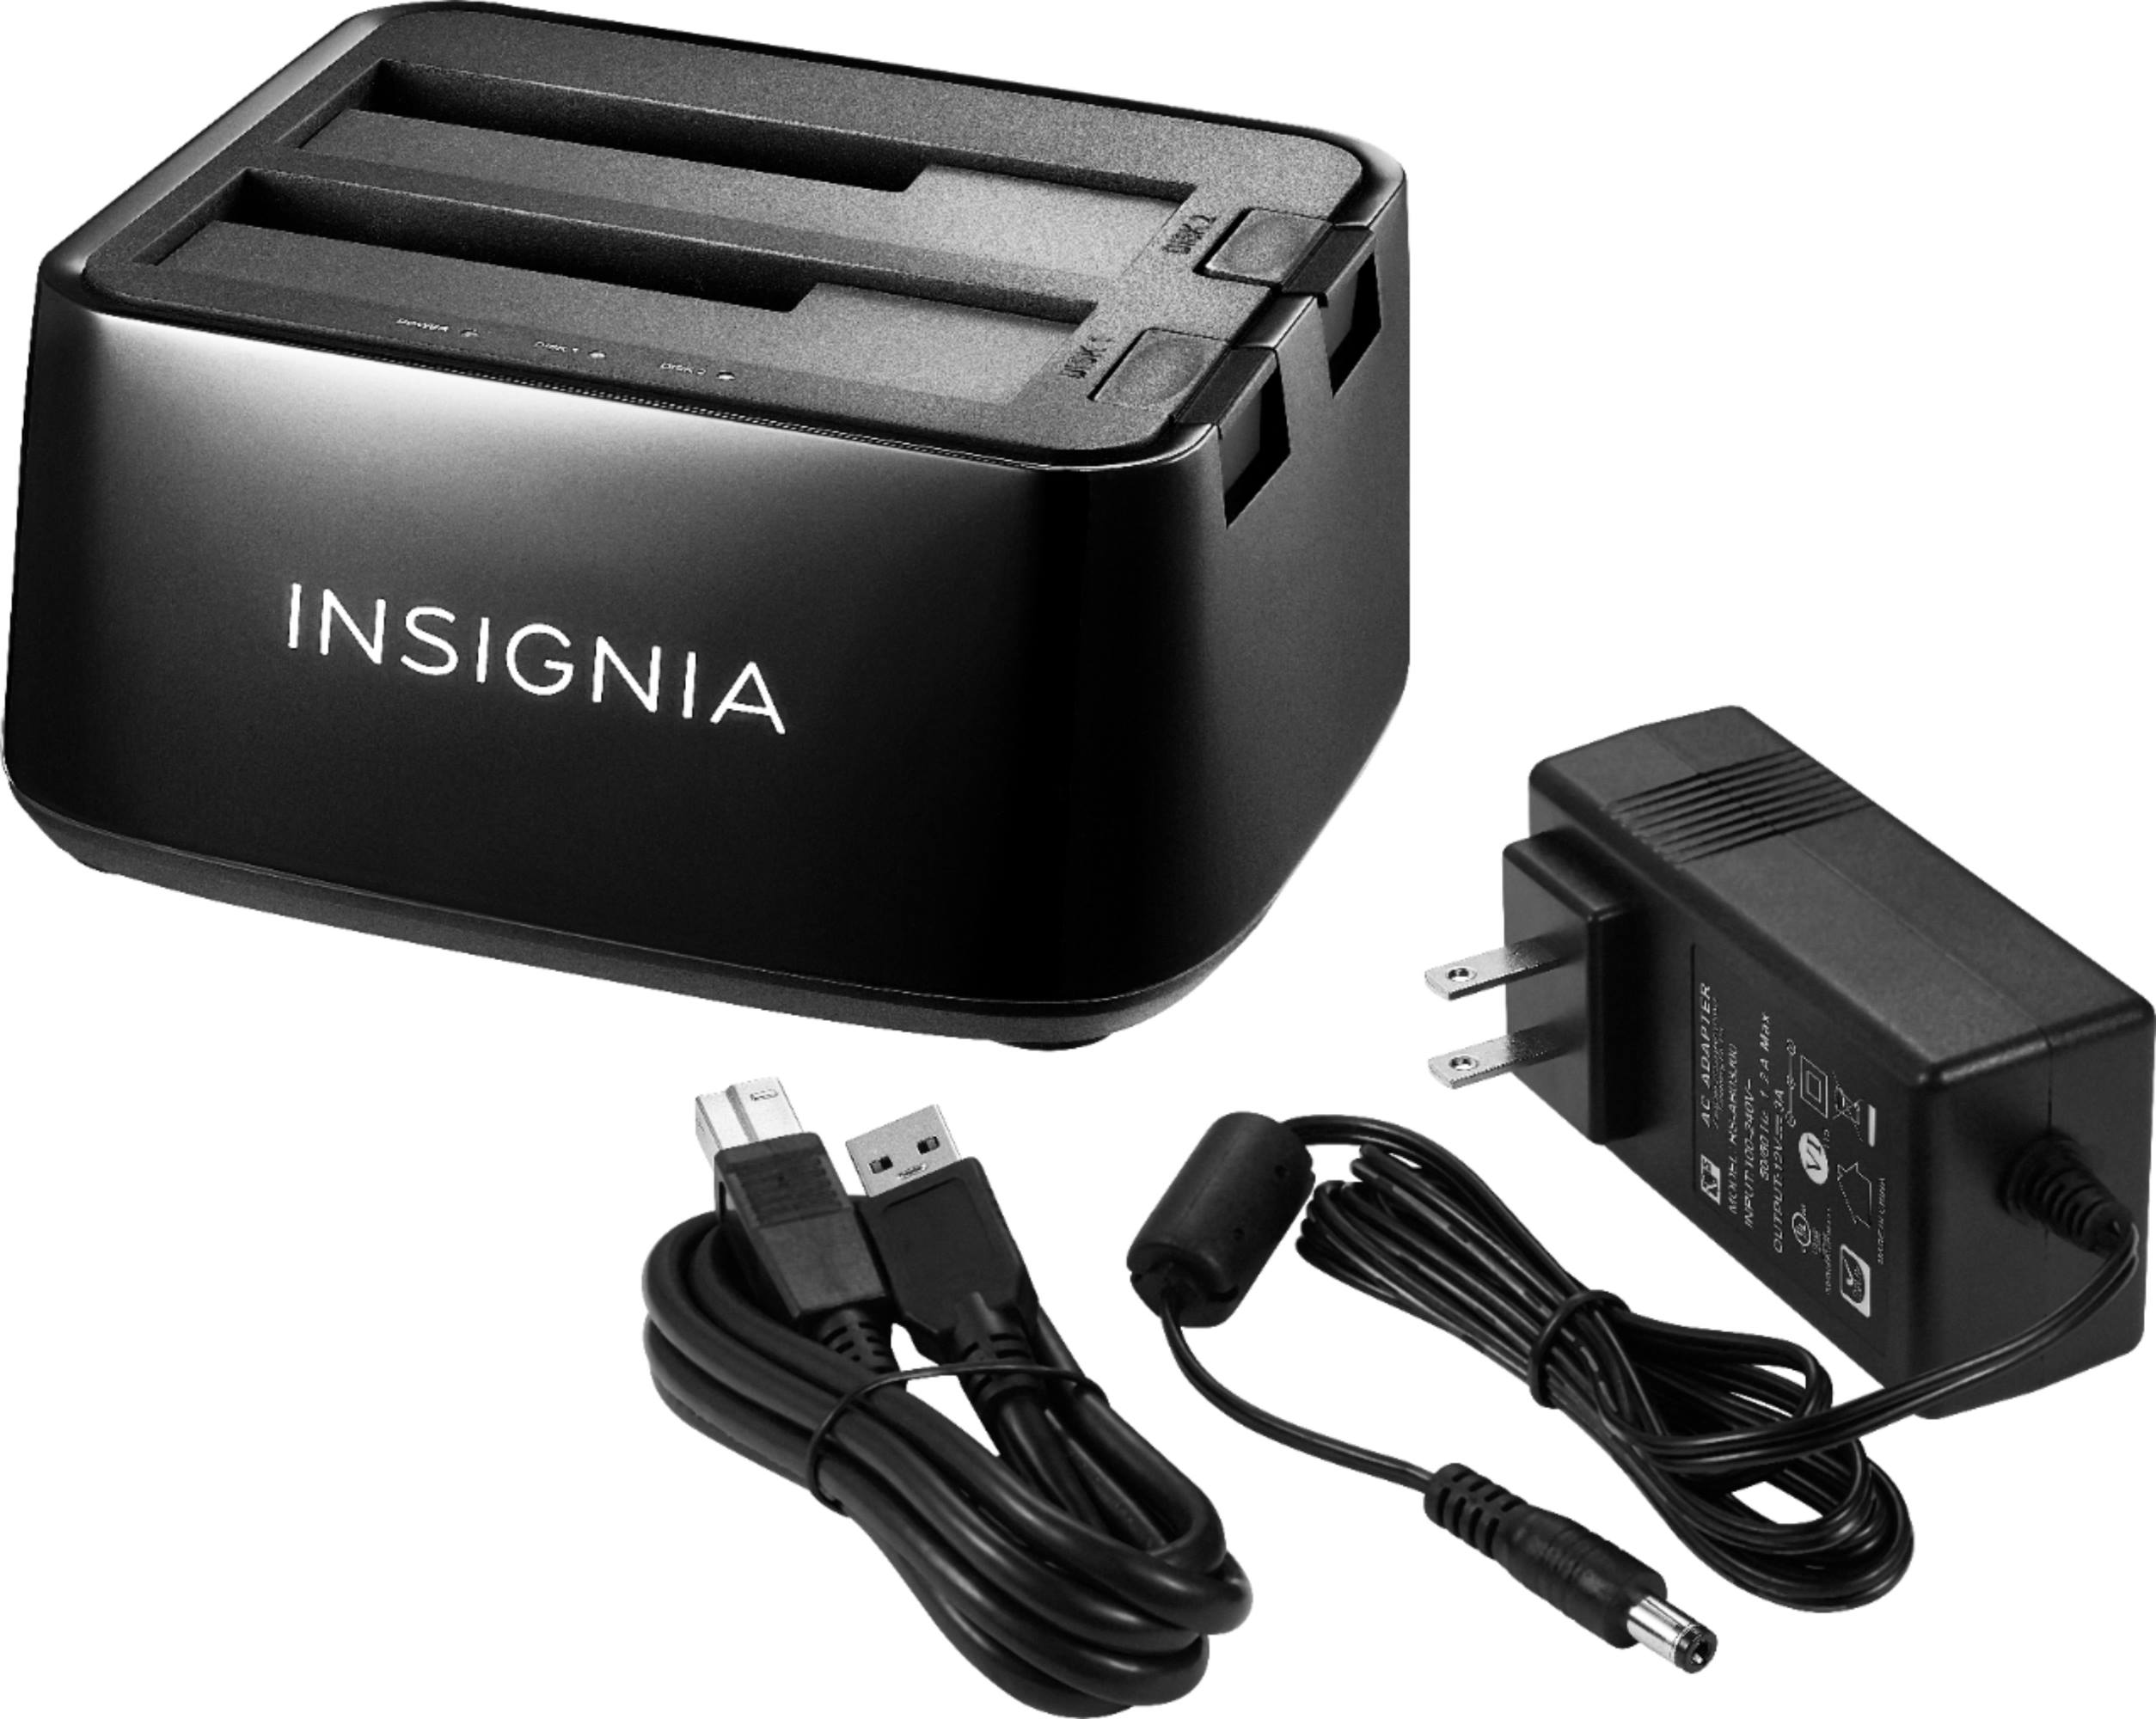 retrieving-output-from-insignia-dual-hard-drive-docking-station-to-your-computer